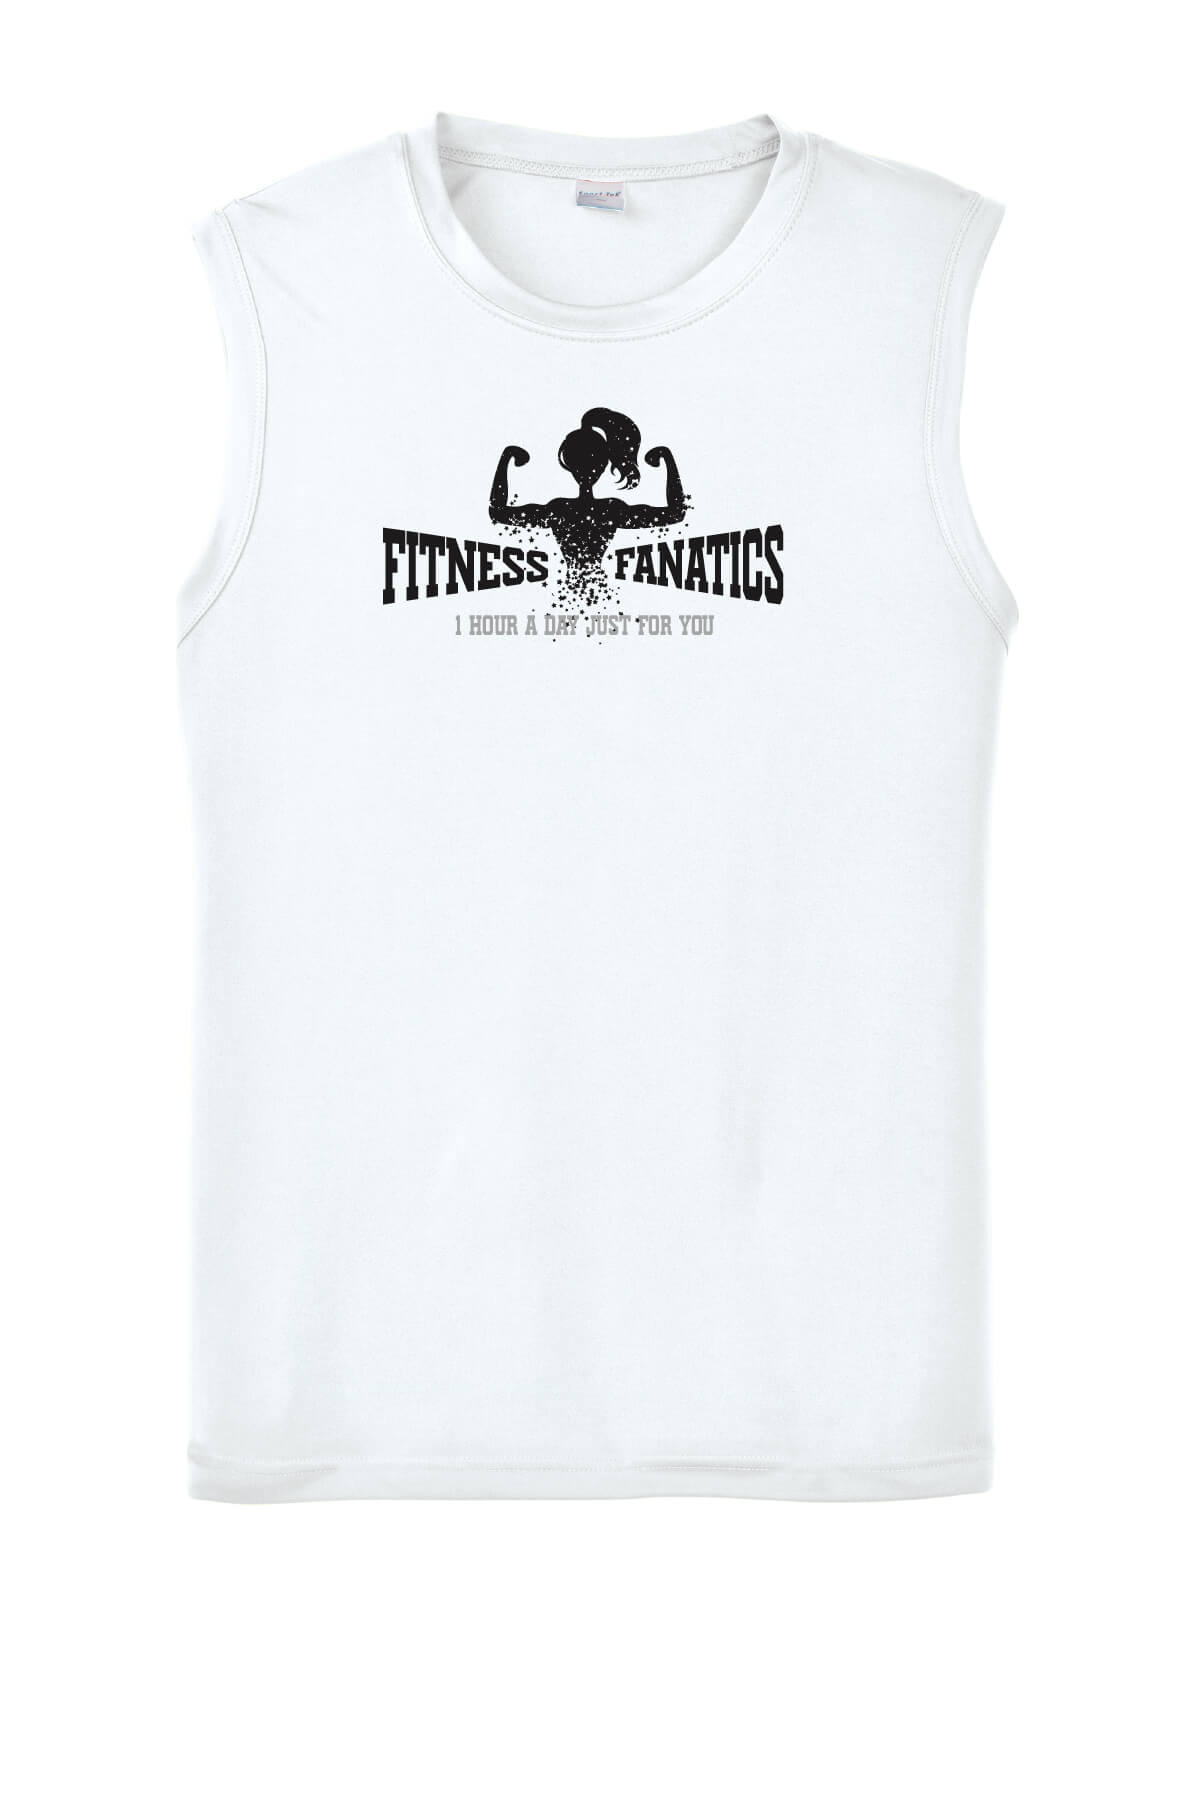 Mens Competitor Tank white with black